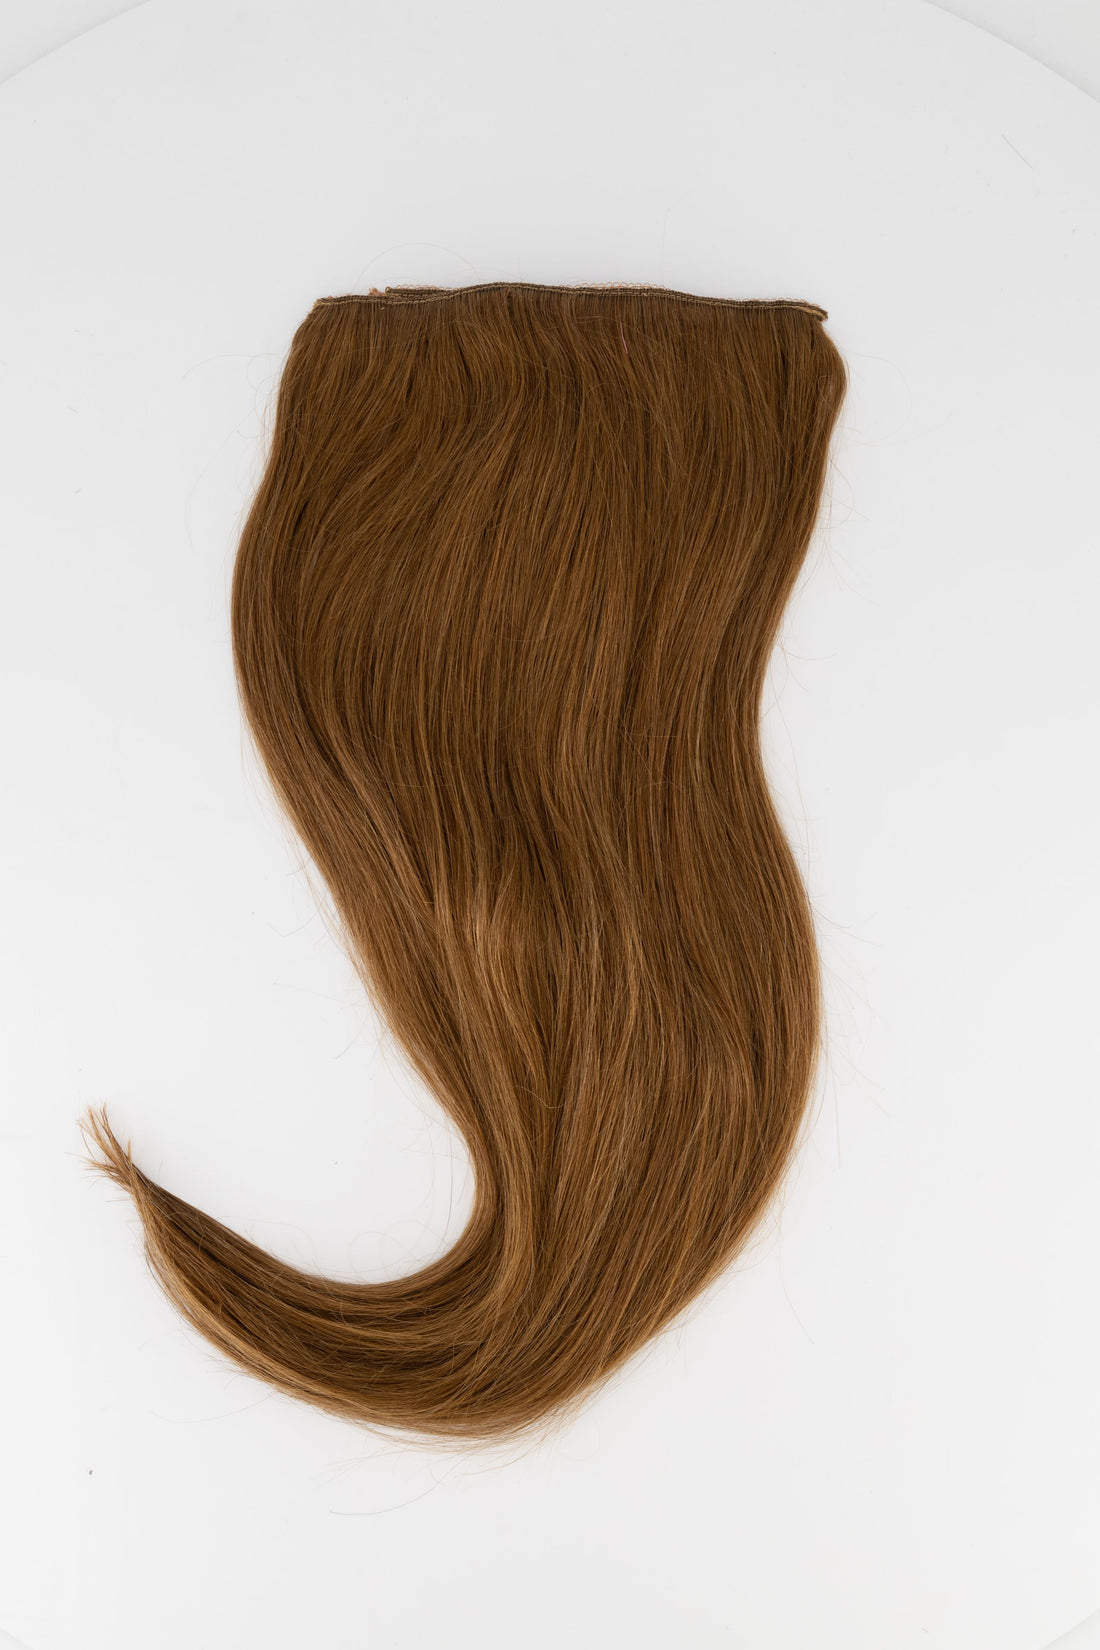 Frontrow clip-in hair extensions in chestnut brown